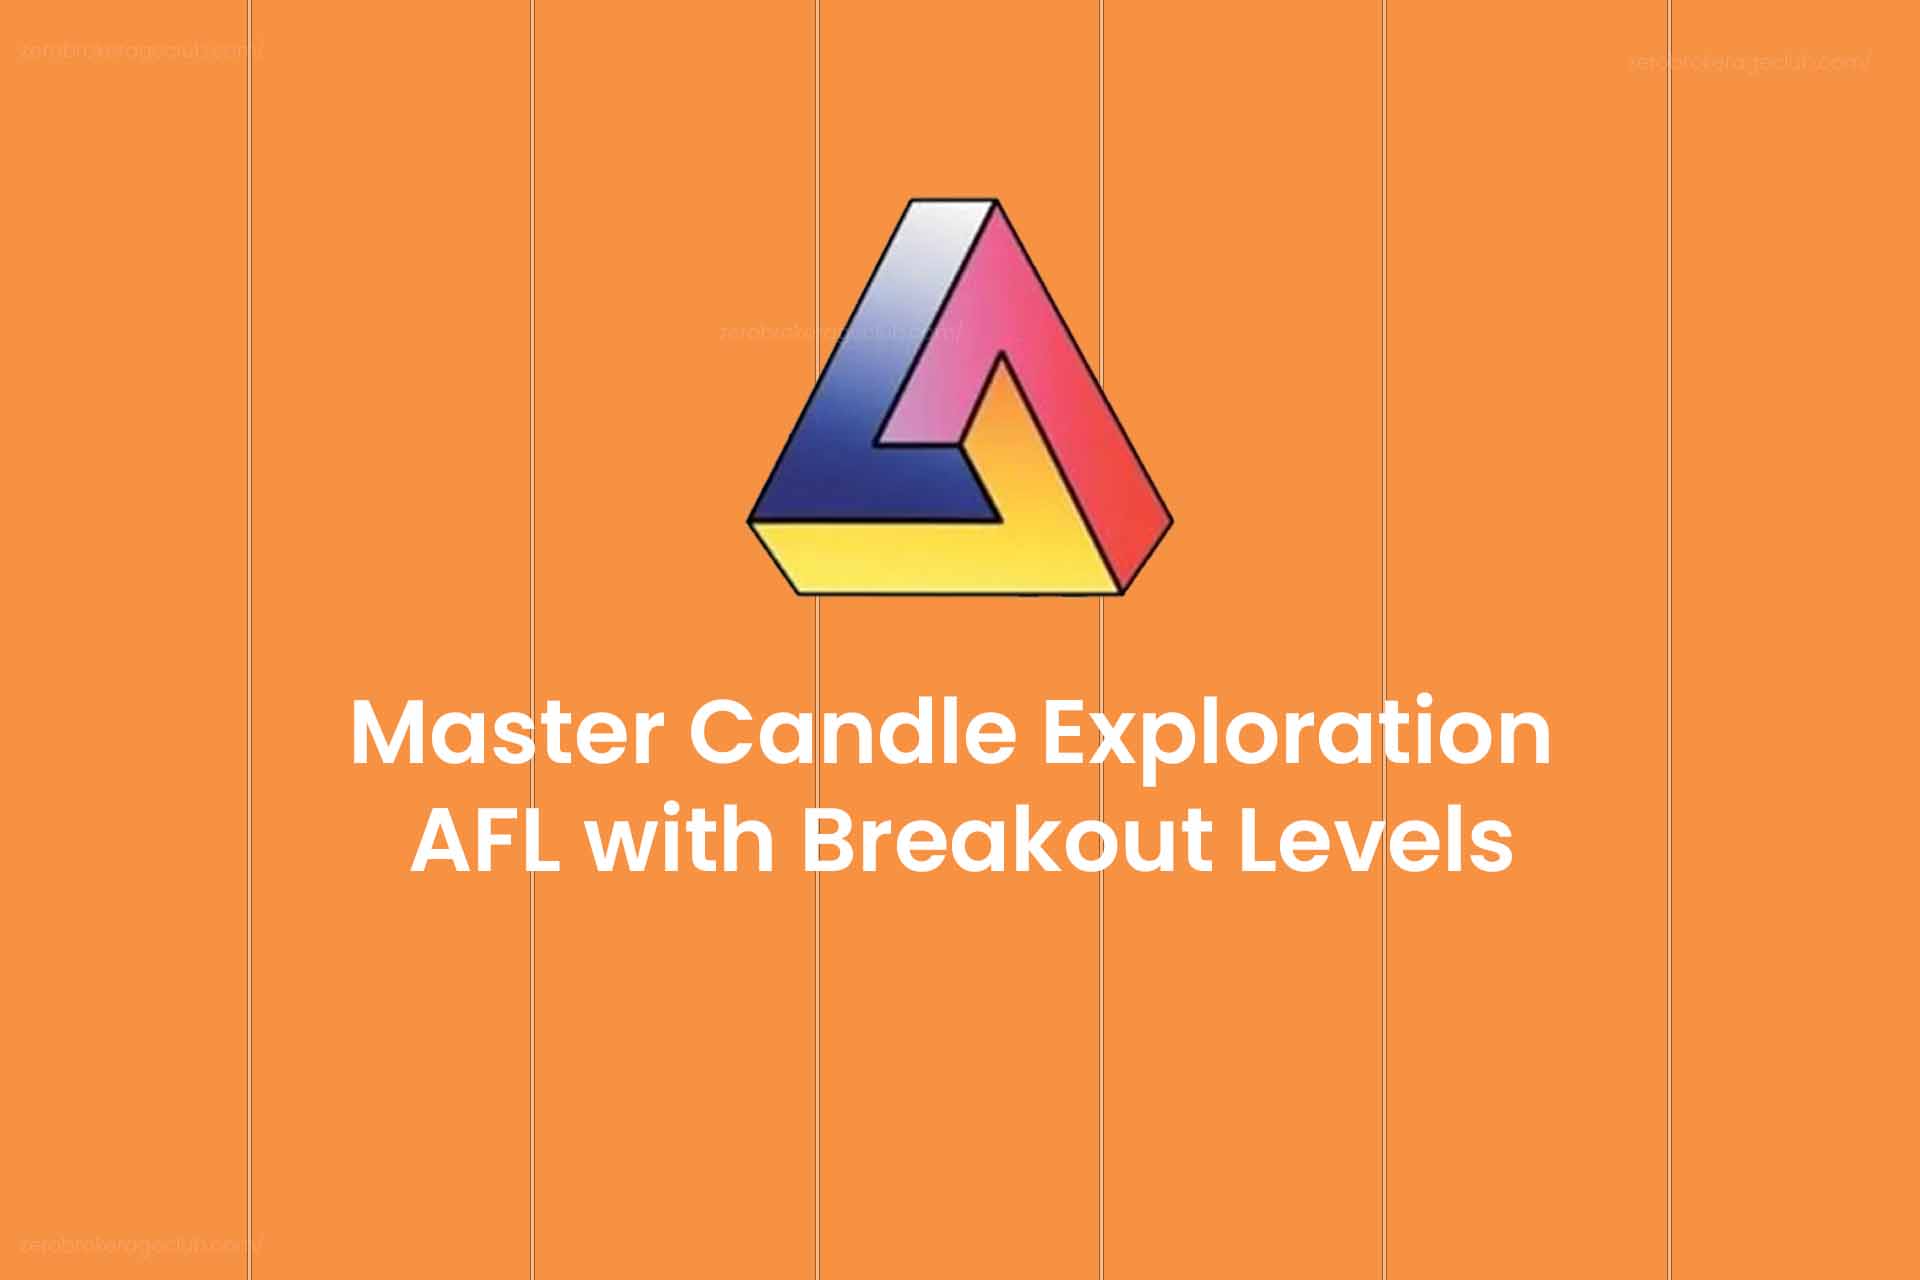 Master Candle Exploration AFL with Breakout Levels